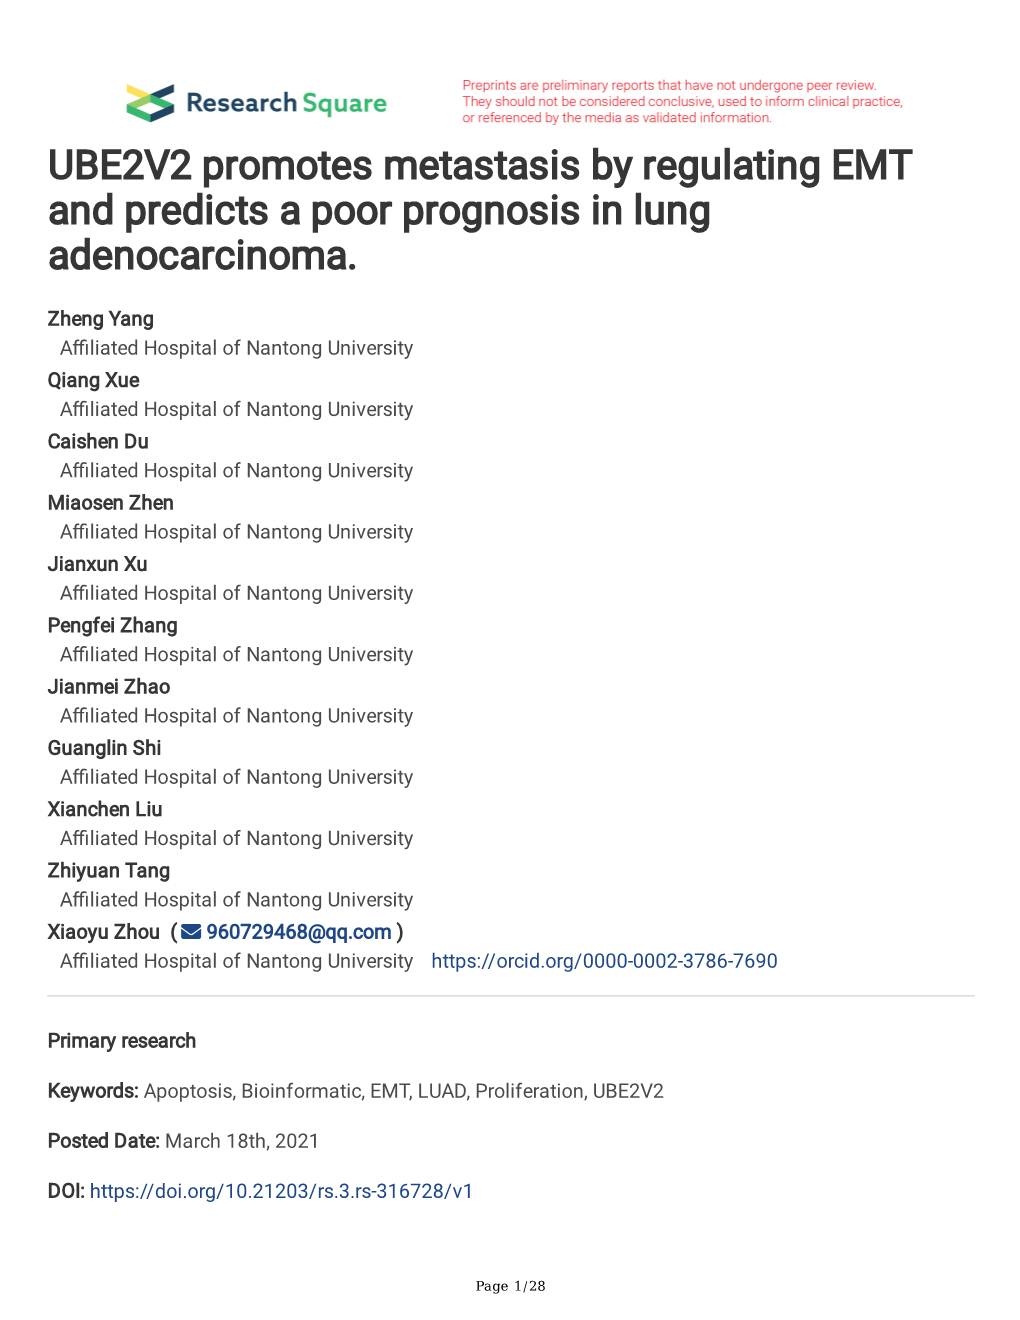 UBE2V2 Promotes Metastasis by Regulating EMT and Predicts a Poor Prognosis in Lung Adenocarcinoma